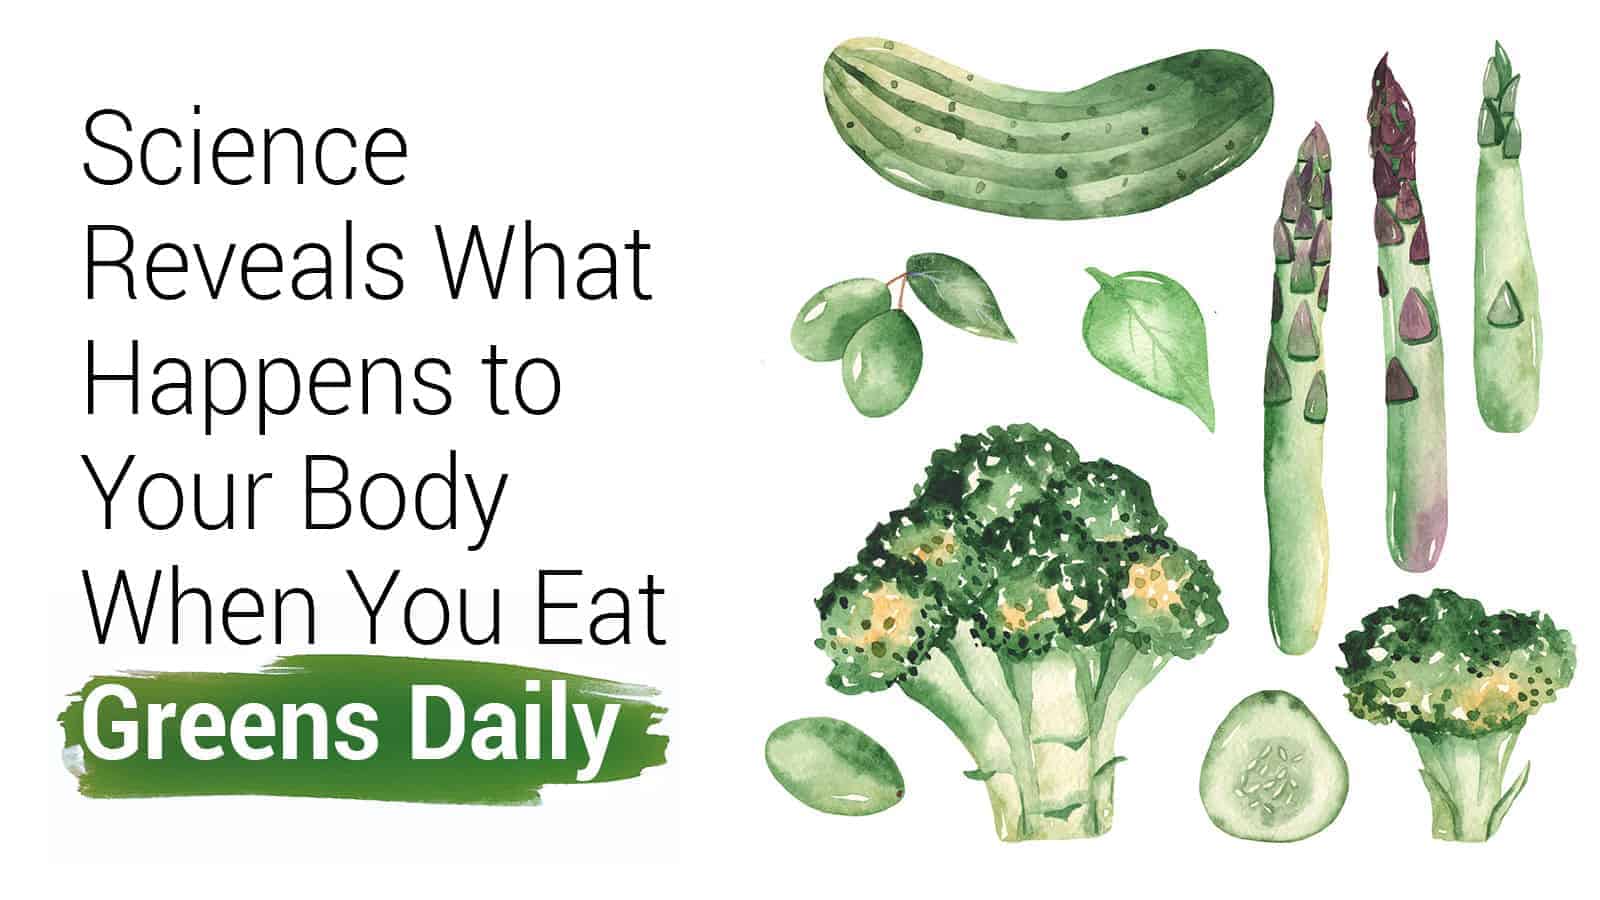 Science Reveals What Happens to Your Body When You Eat Greens Daily